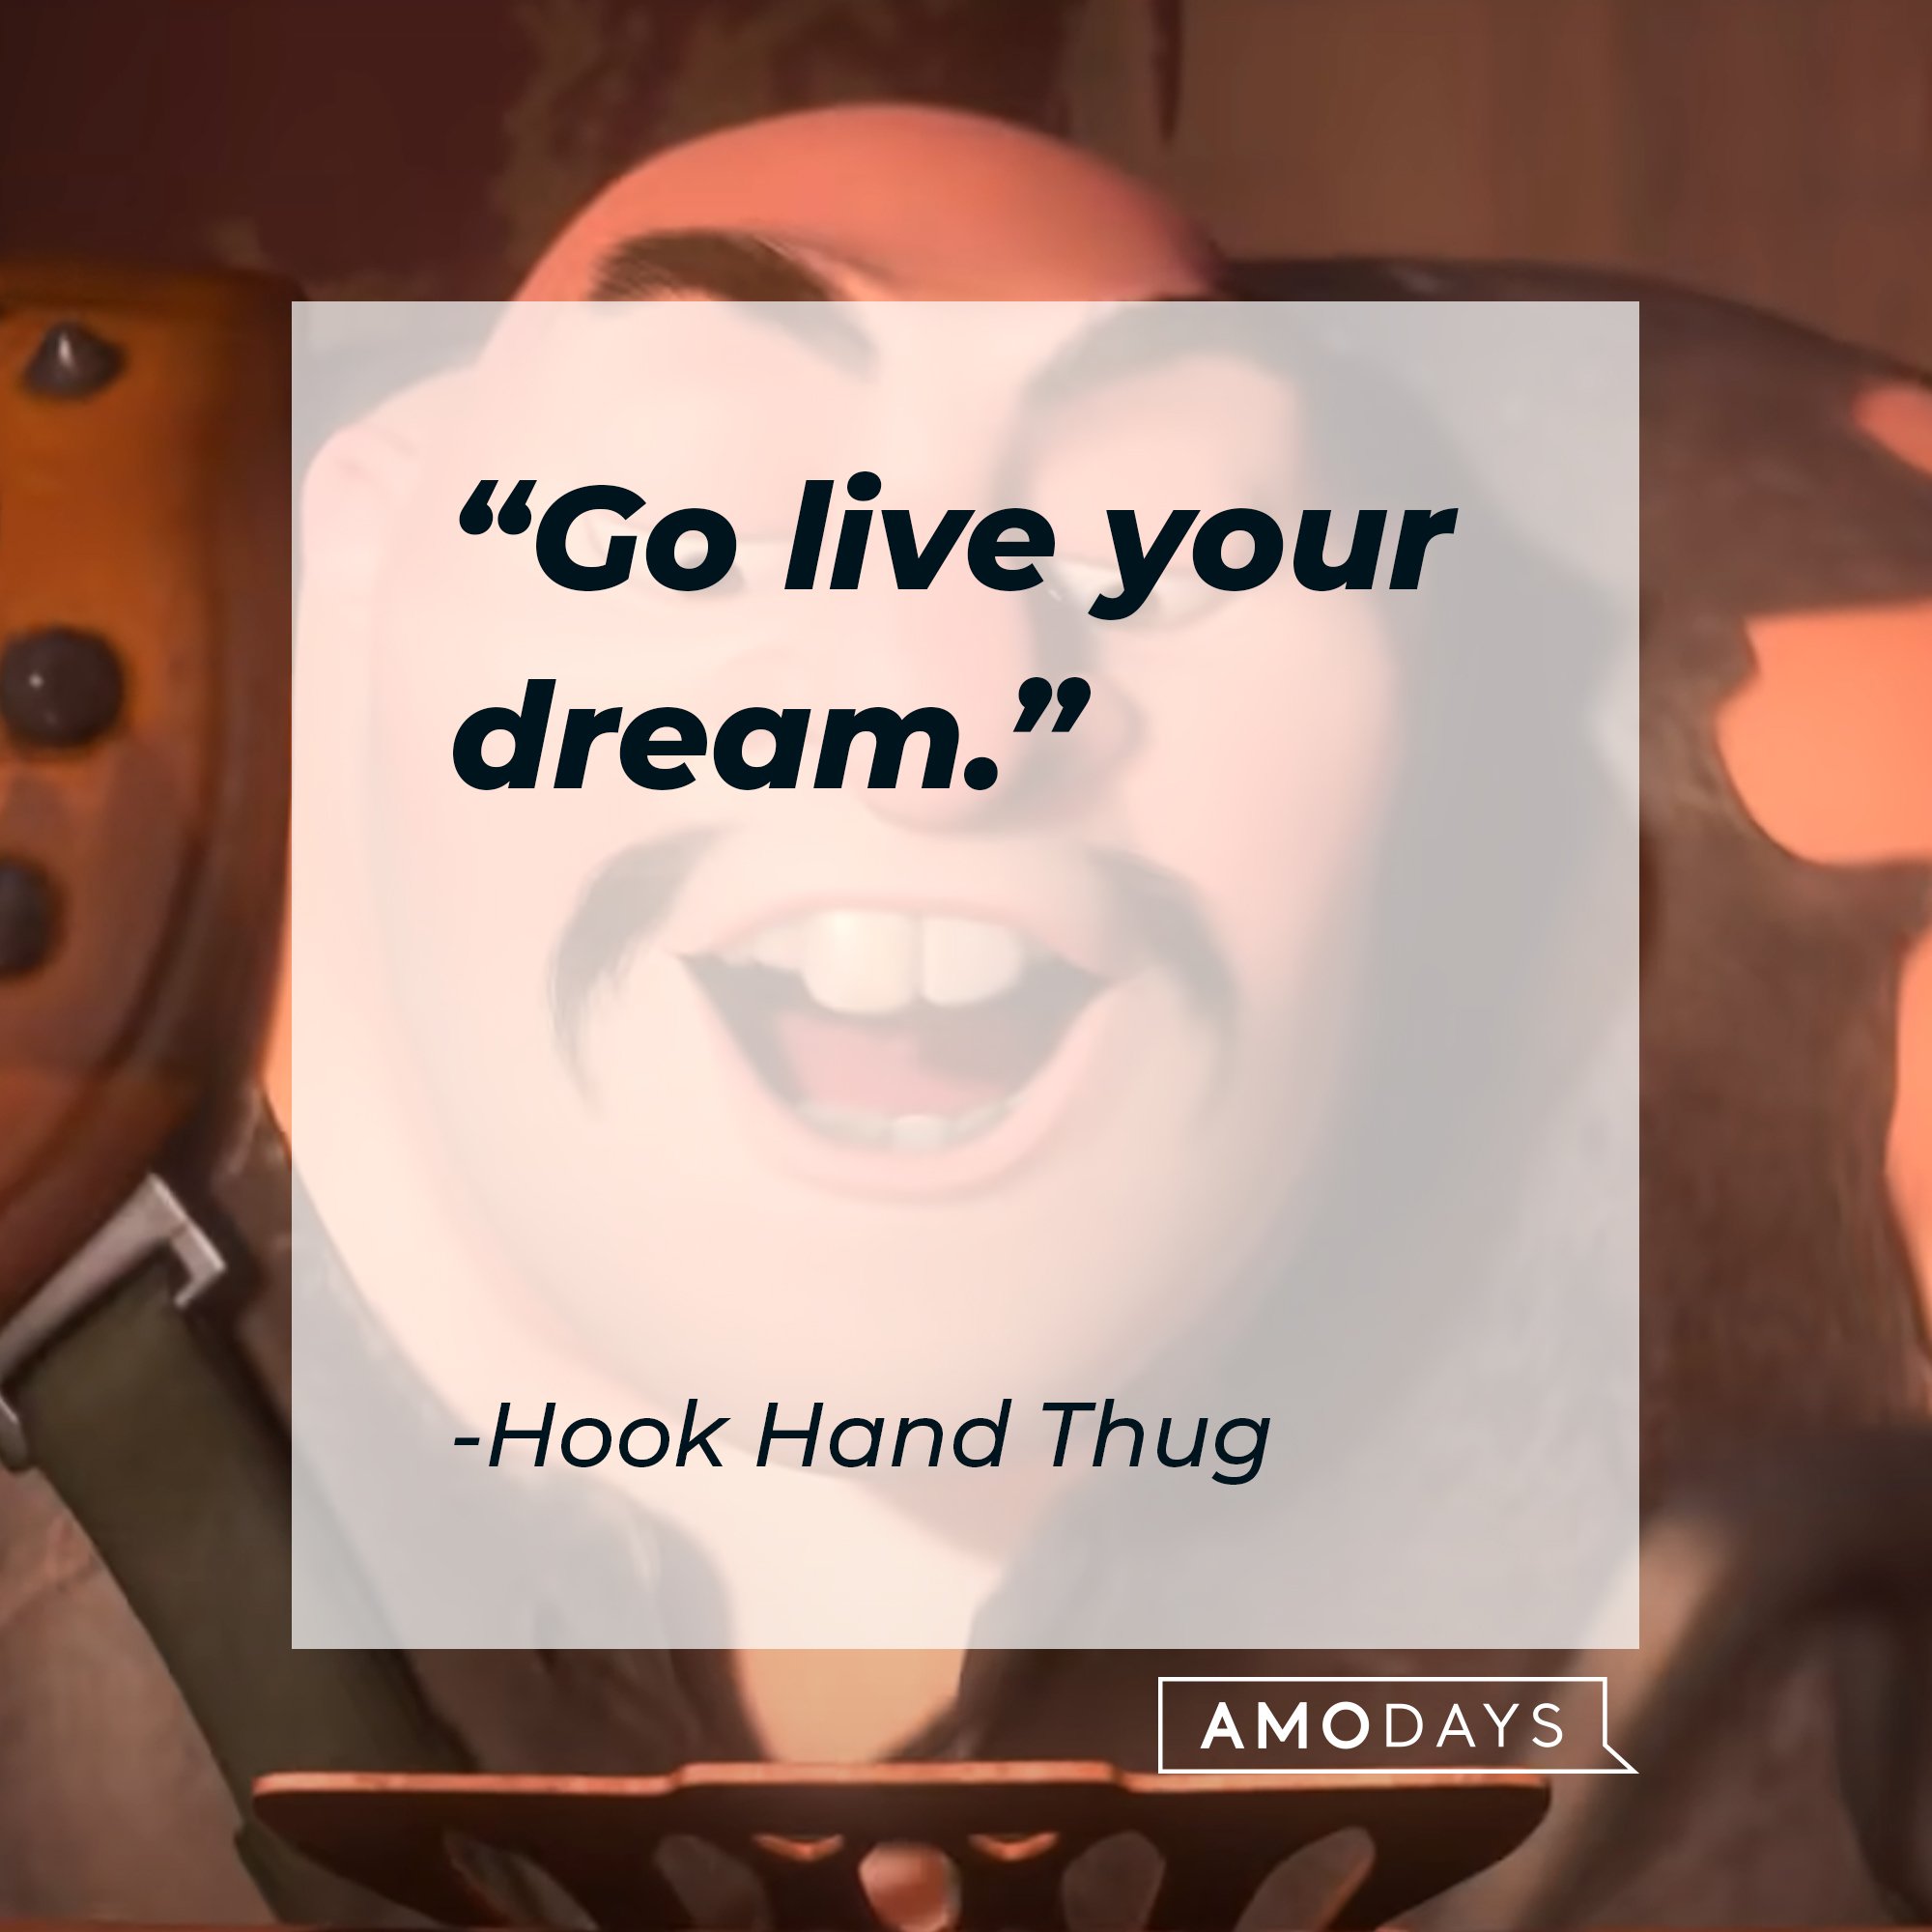 Hook Hand Thug's quote: "Go live your dream." | Image: AmoDays